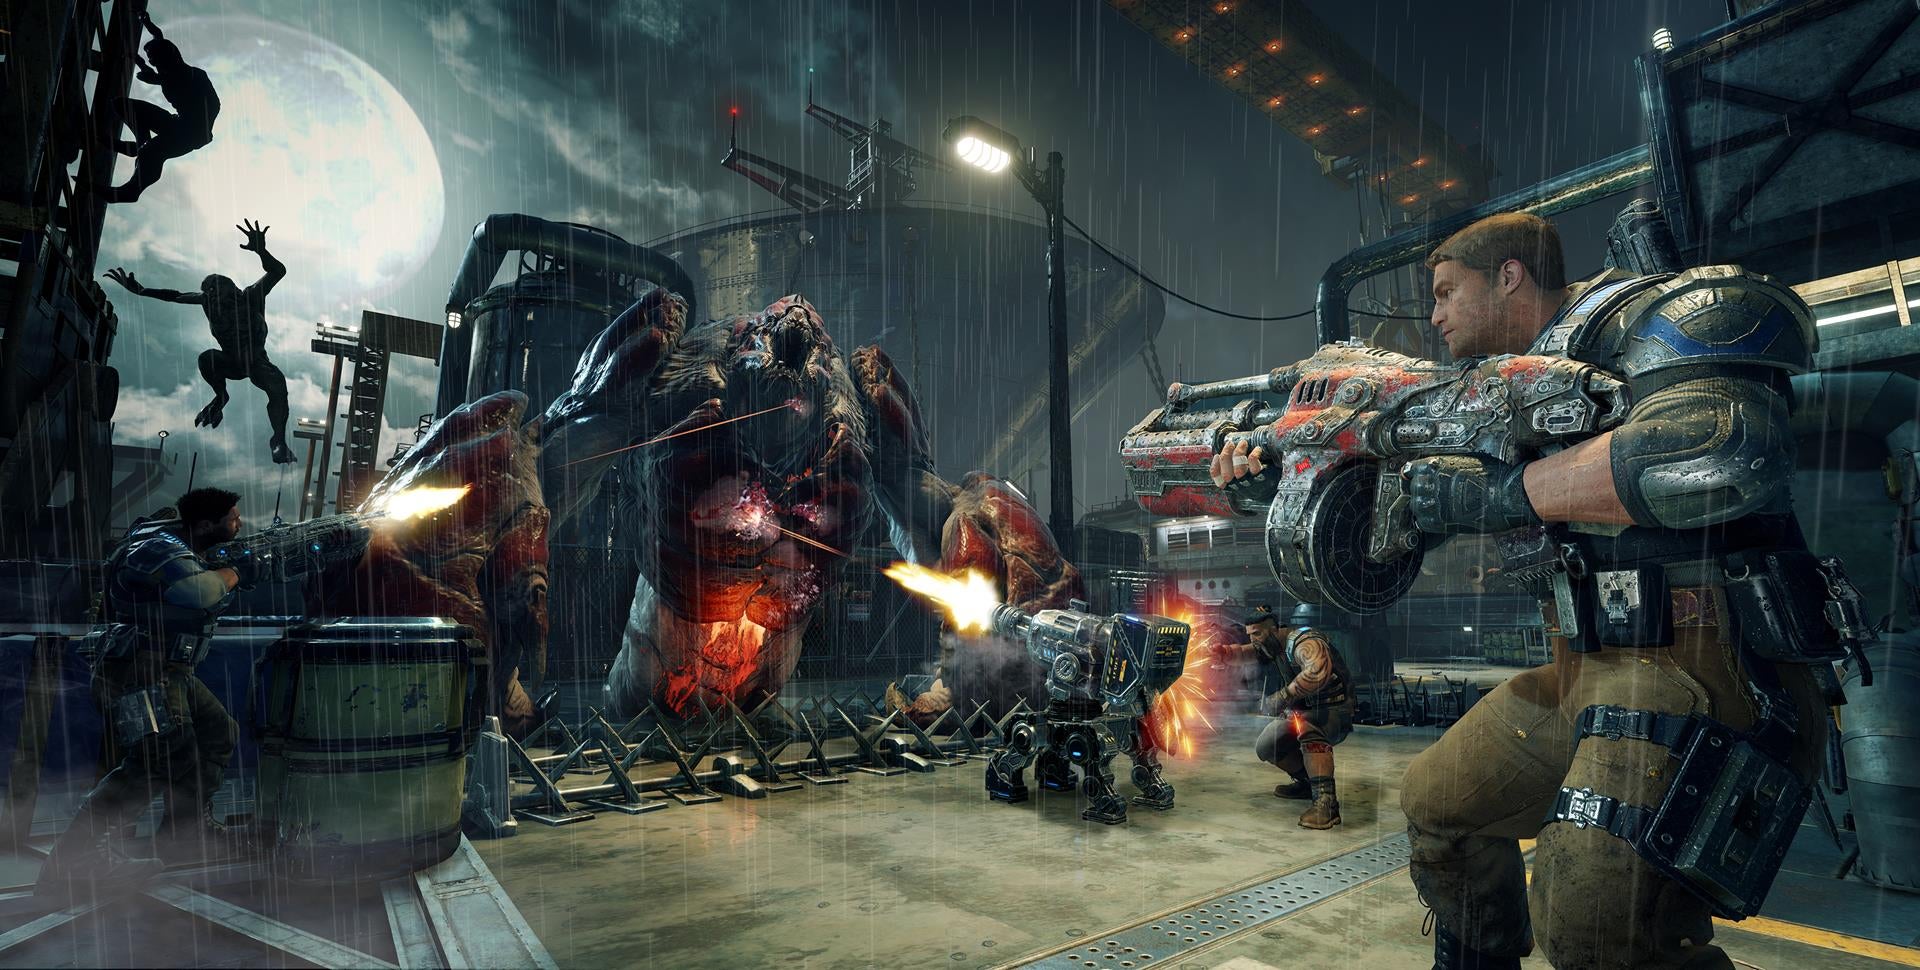 Image for Gears of War 4 now supports cross-play between Xbox One and Windows 10 in Social Quickplay